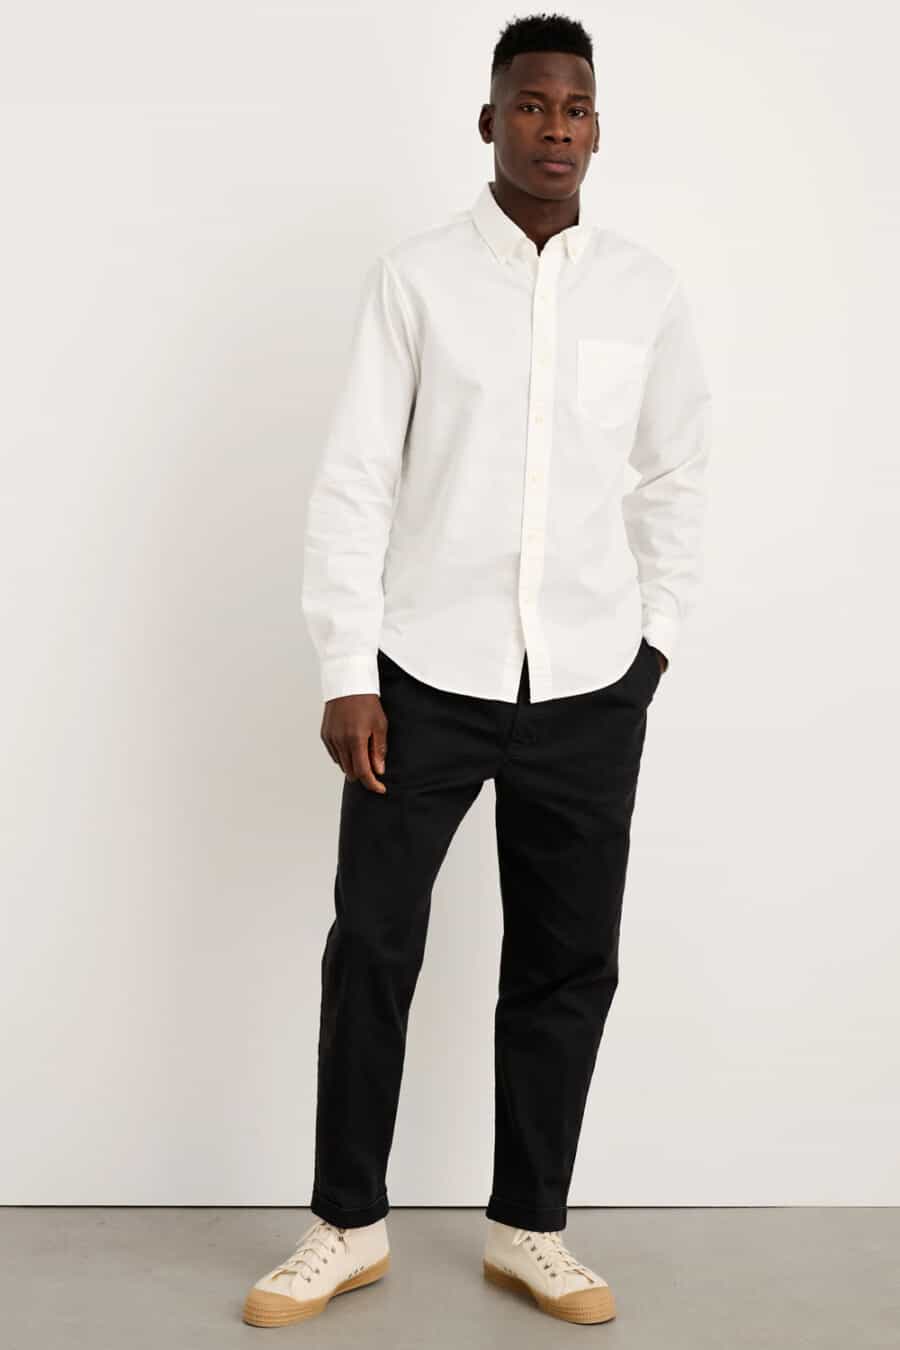 Men's black pants, white Oxford shirt and cream canvas high top sneakers outfit